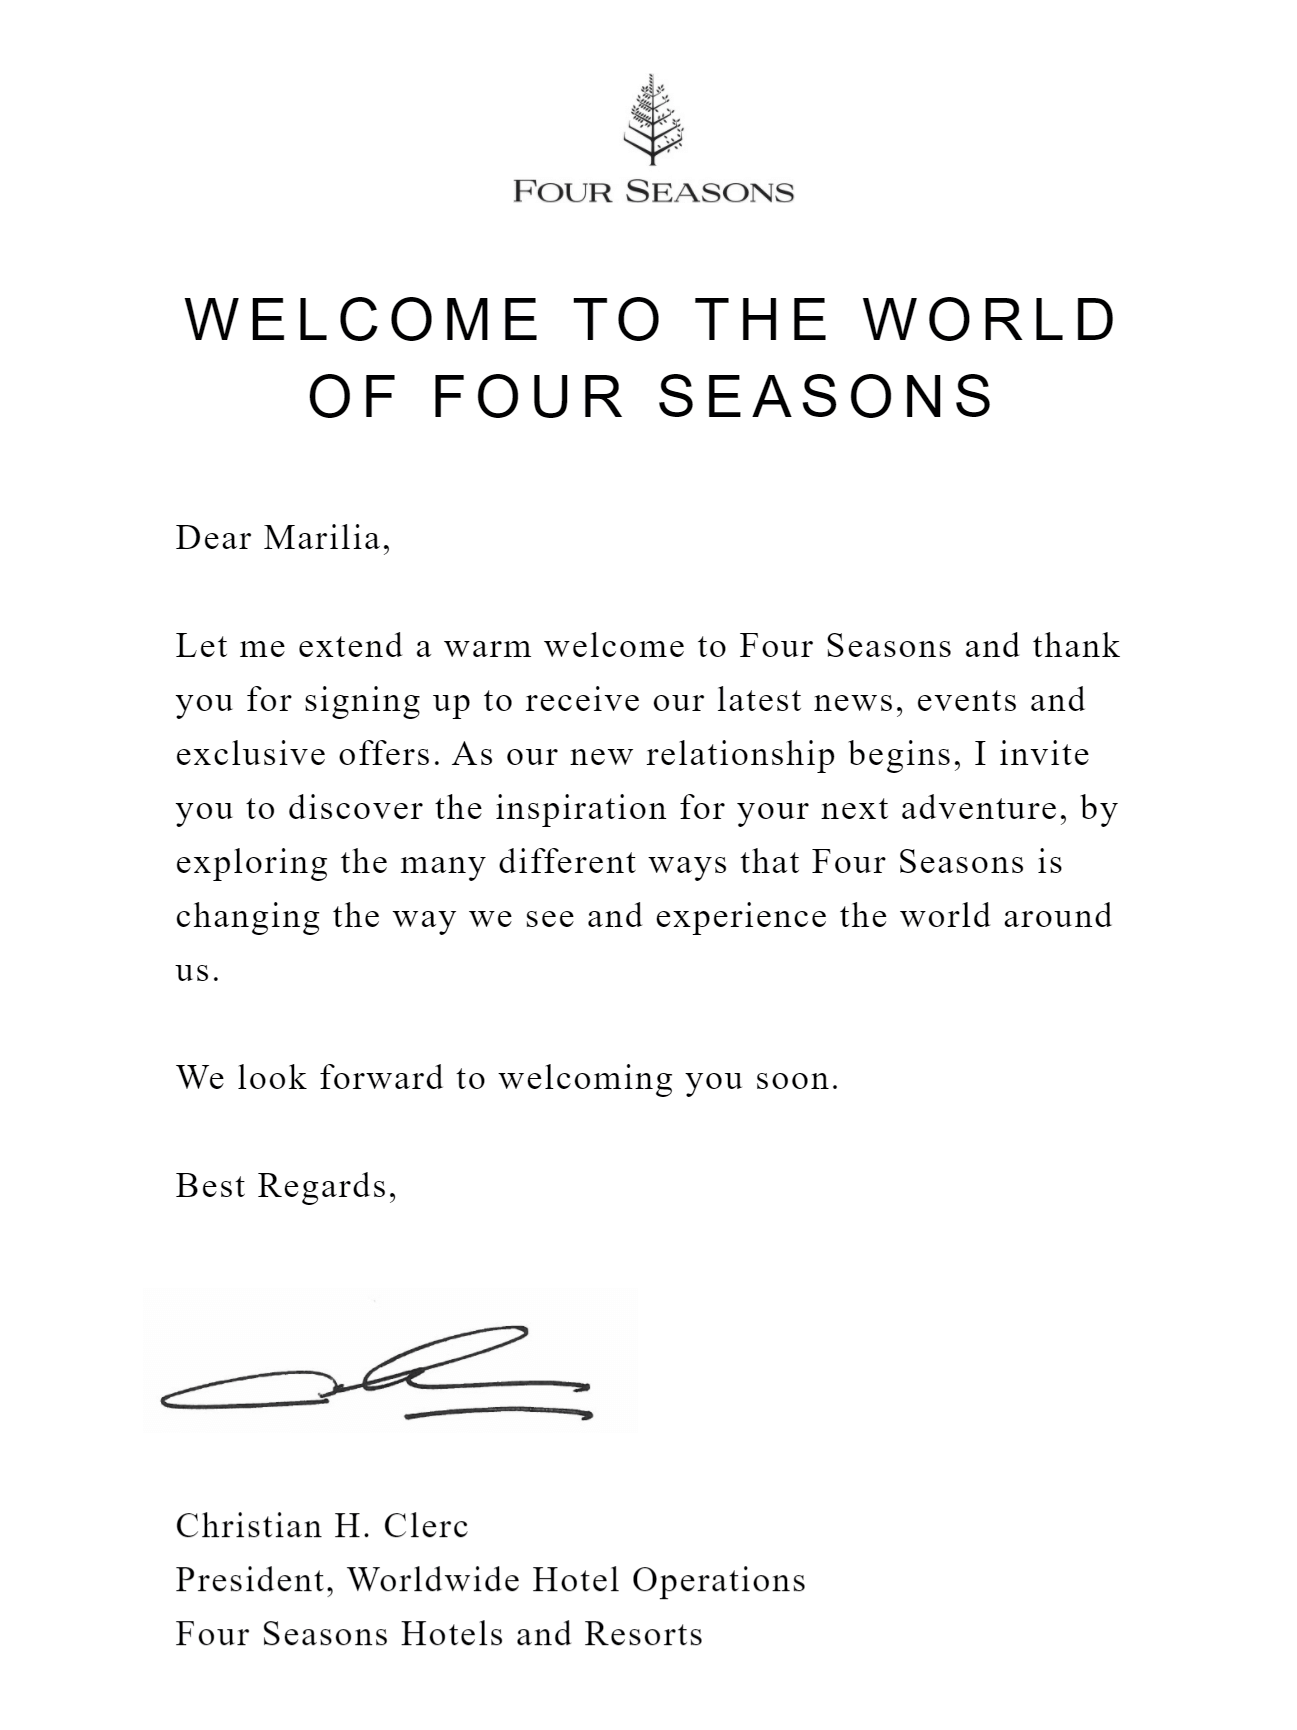 examples of welcome letters